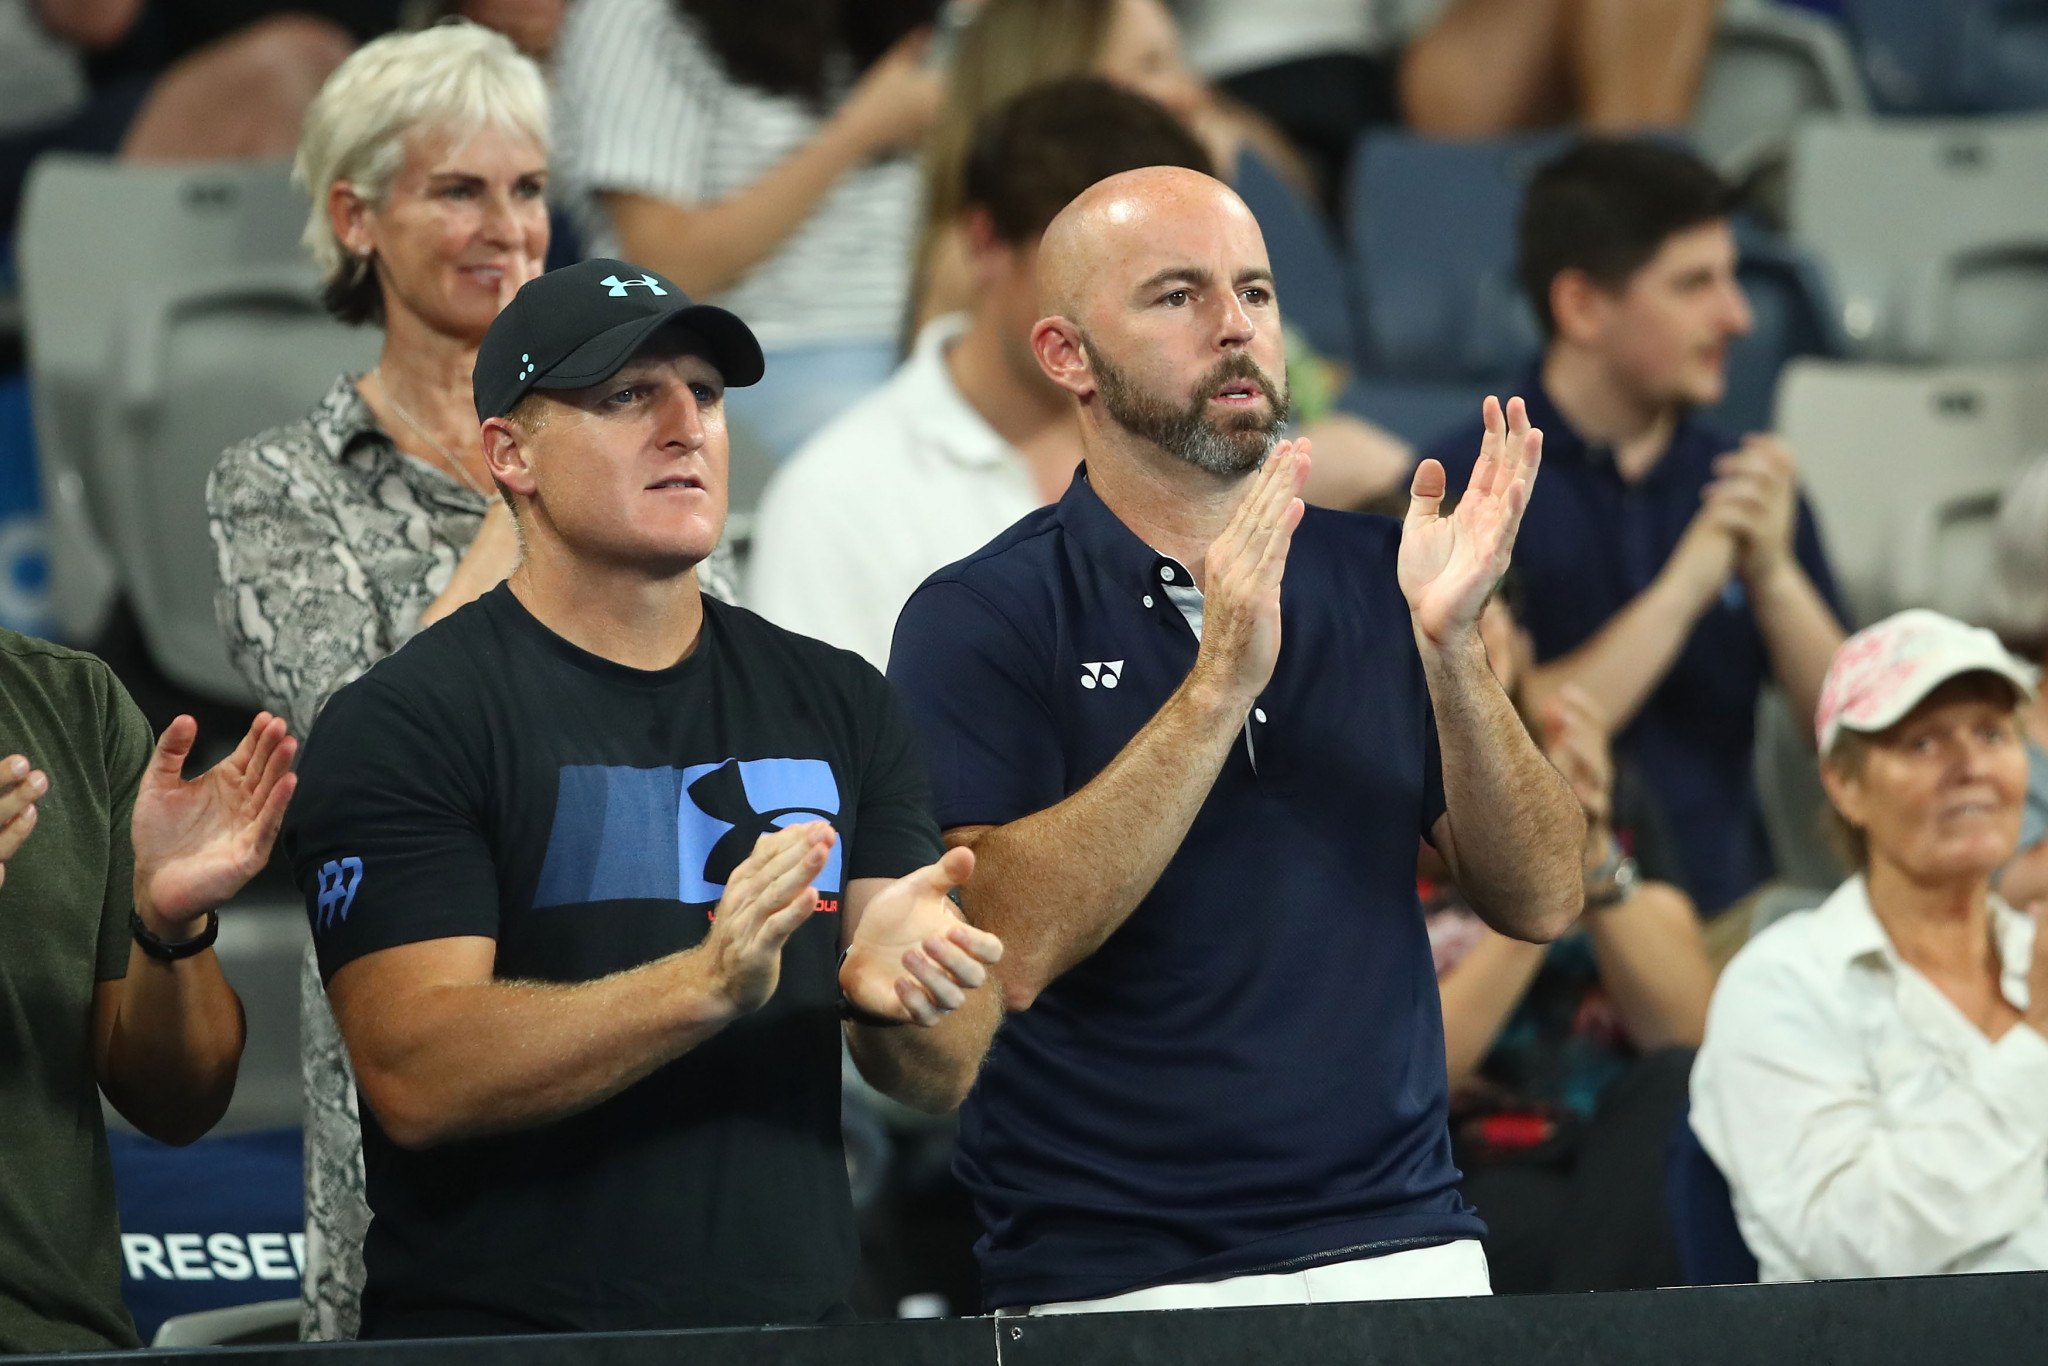 The International Tennis Federation has today announced the appointment of Jamie Delgado, right, as a player relations consultant ©Getty Images